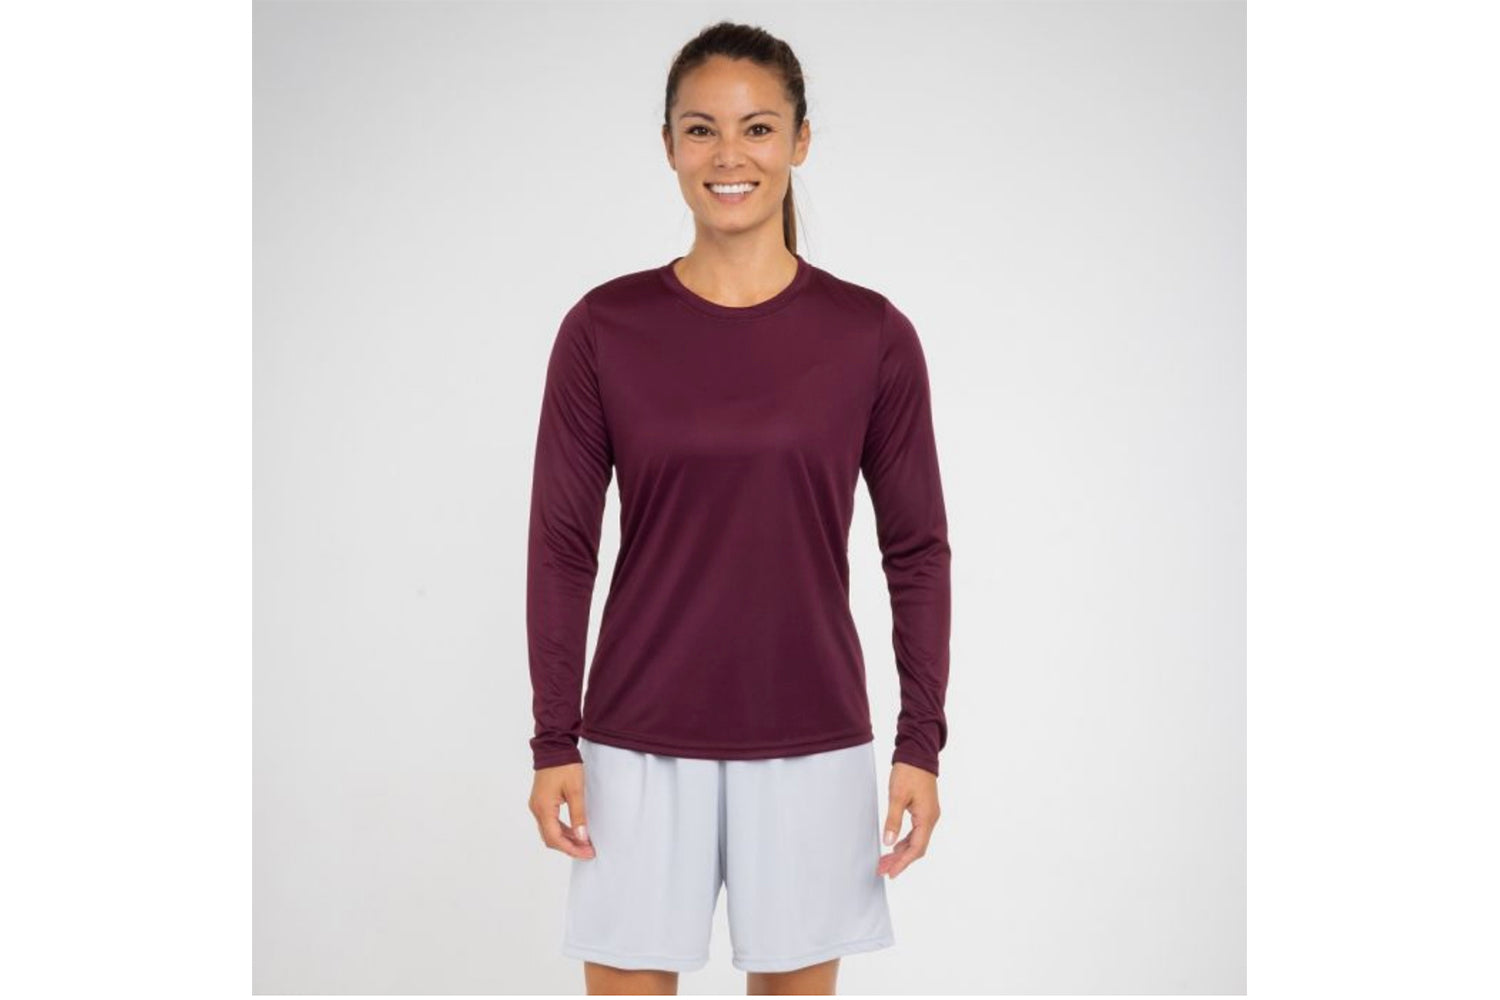 A4 Cooling Performance Women's Crew Soccer Jersey (LS)